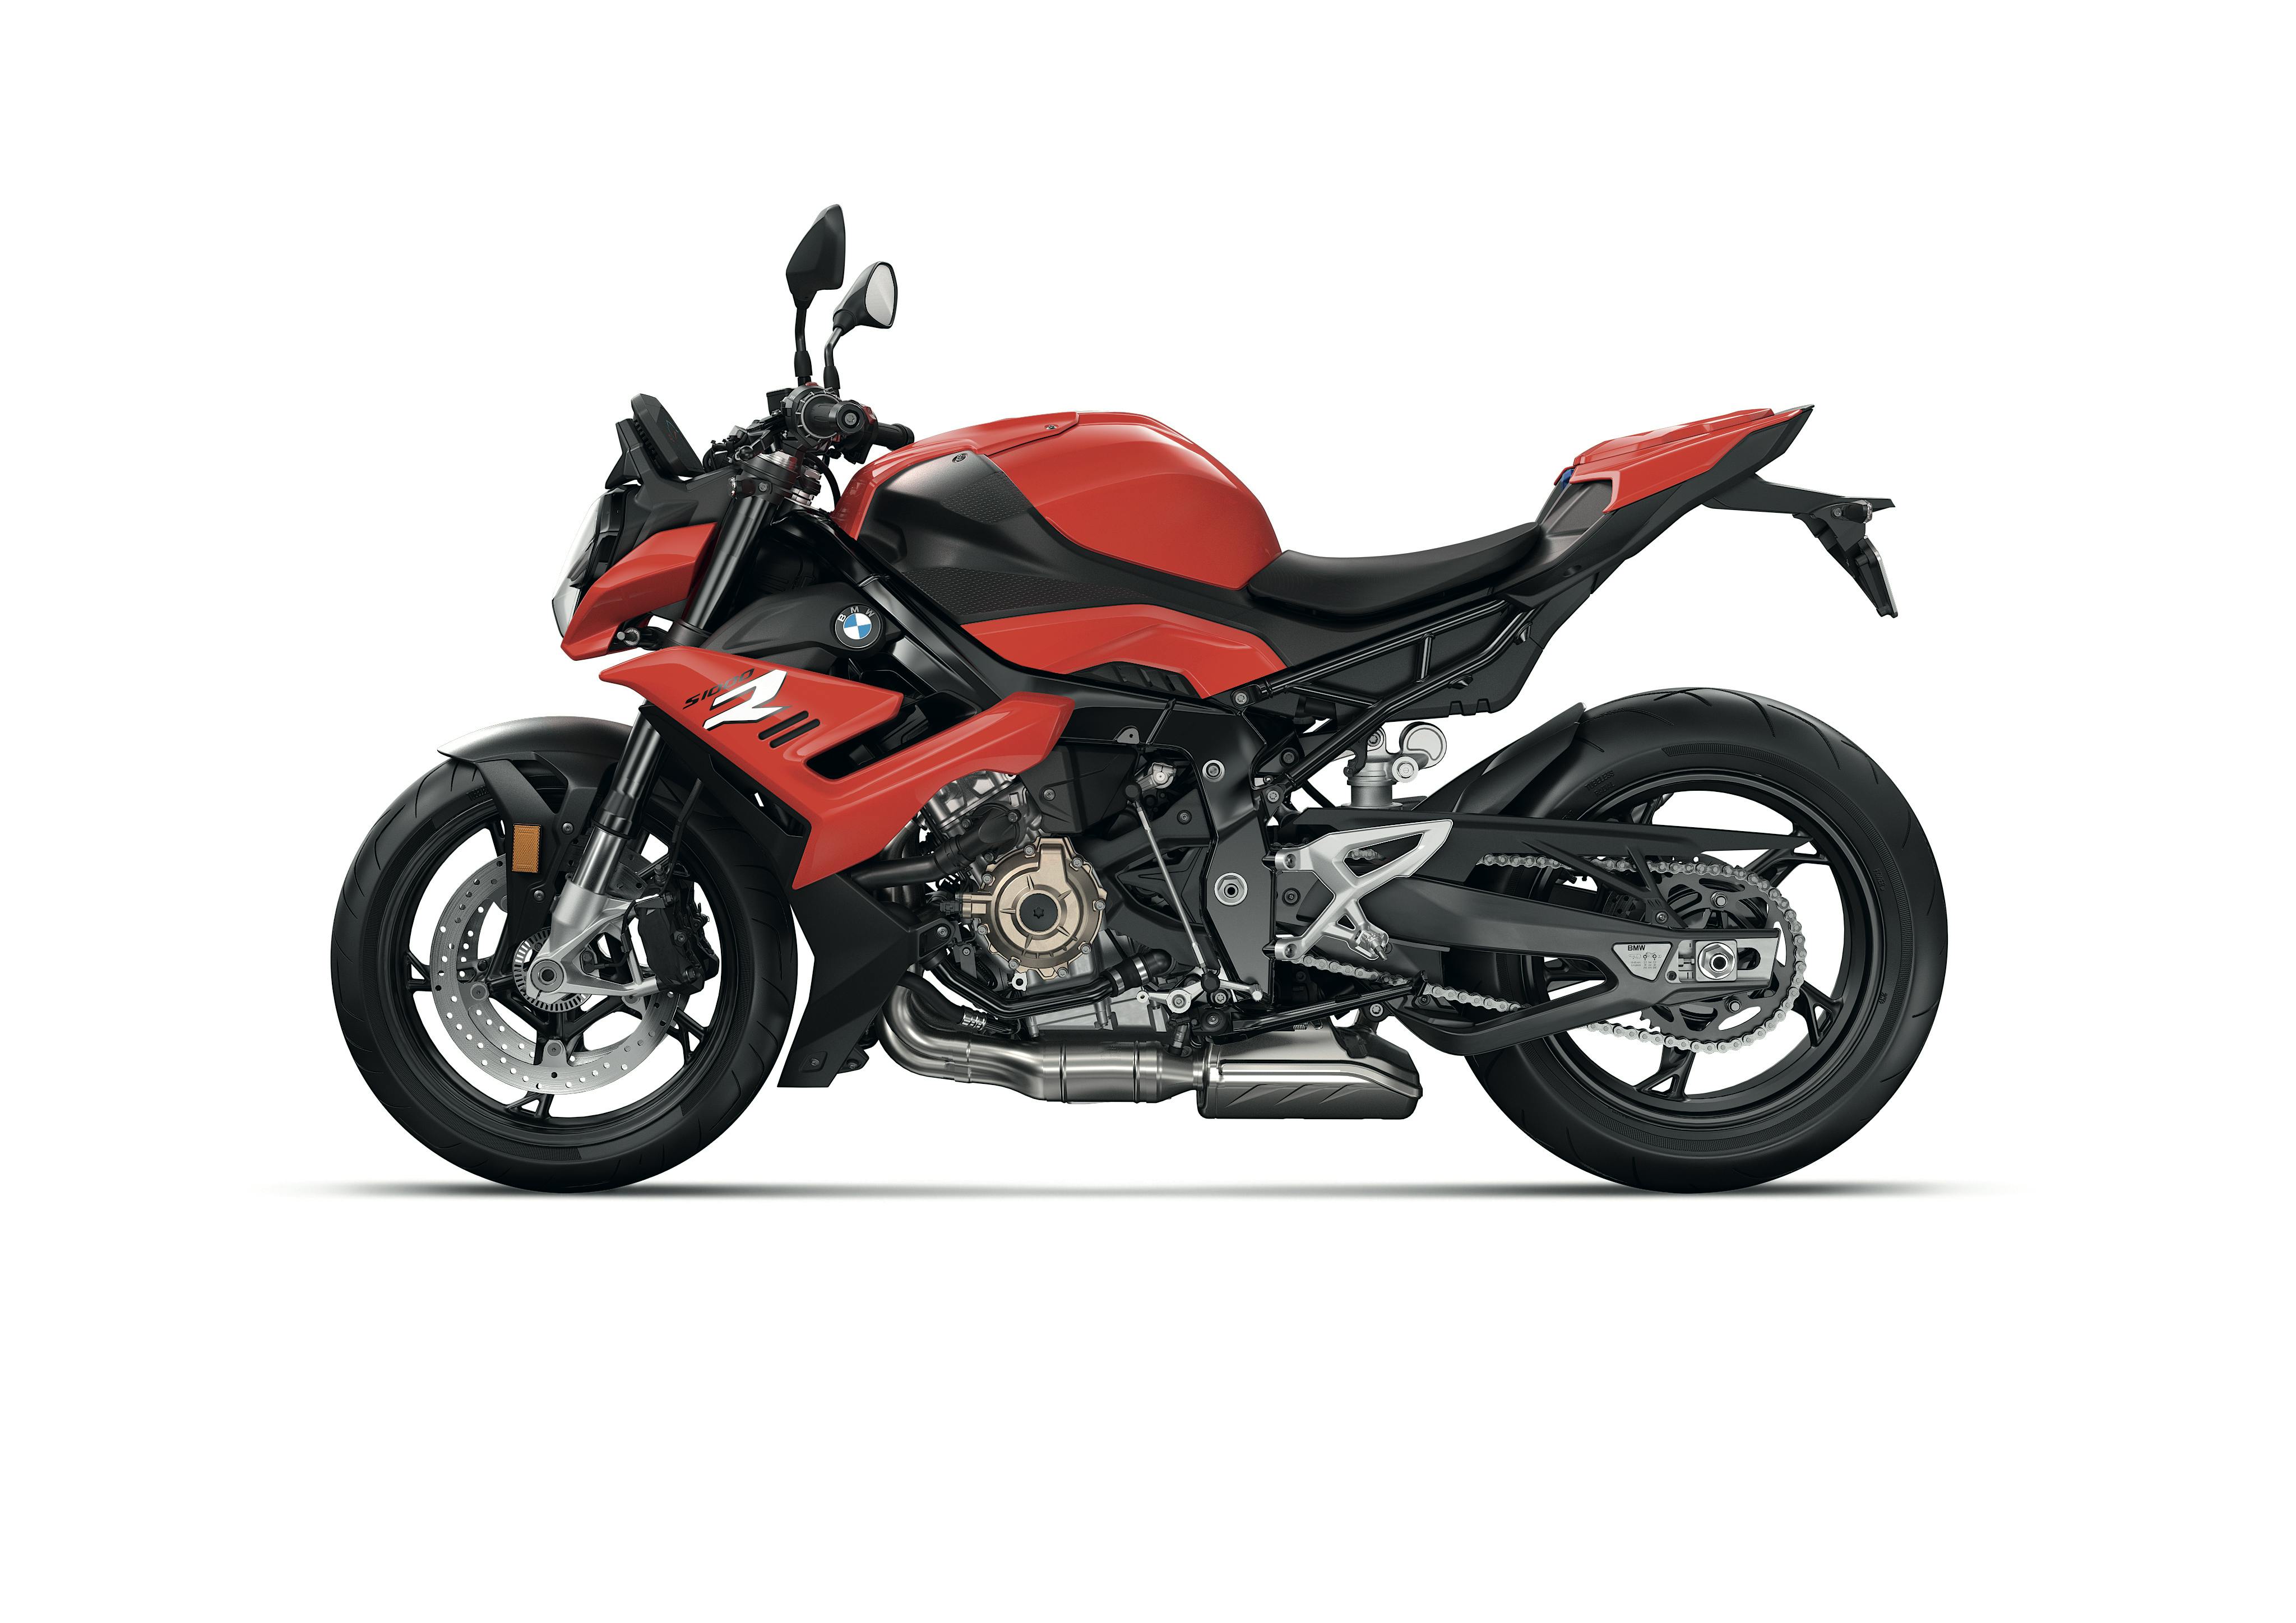 BMW S 1000 R in racing red colour